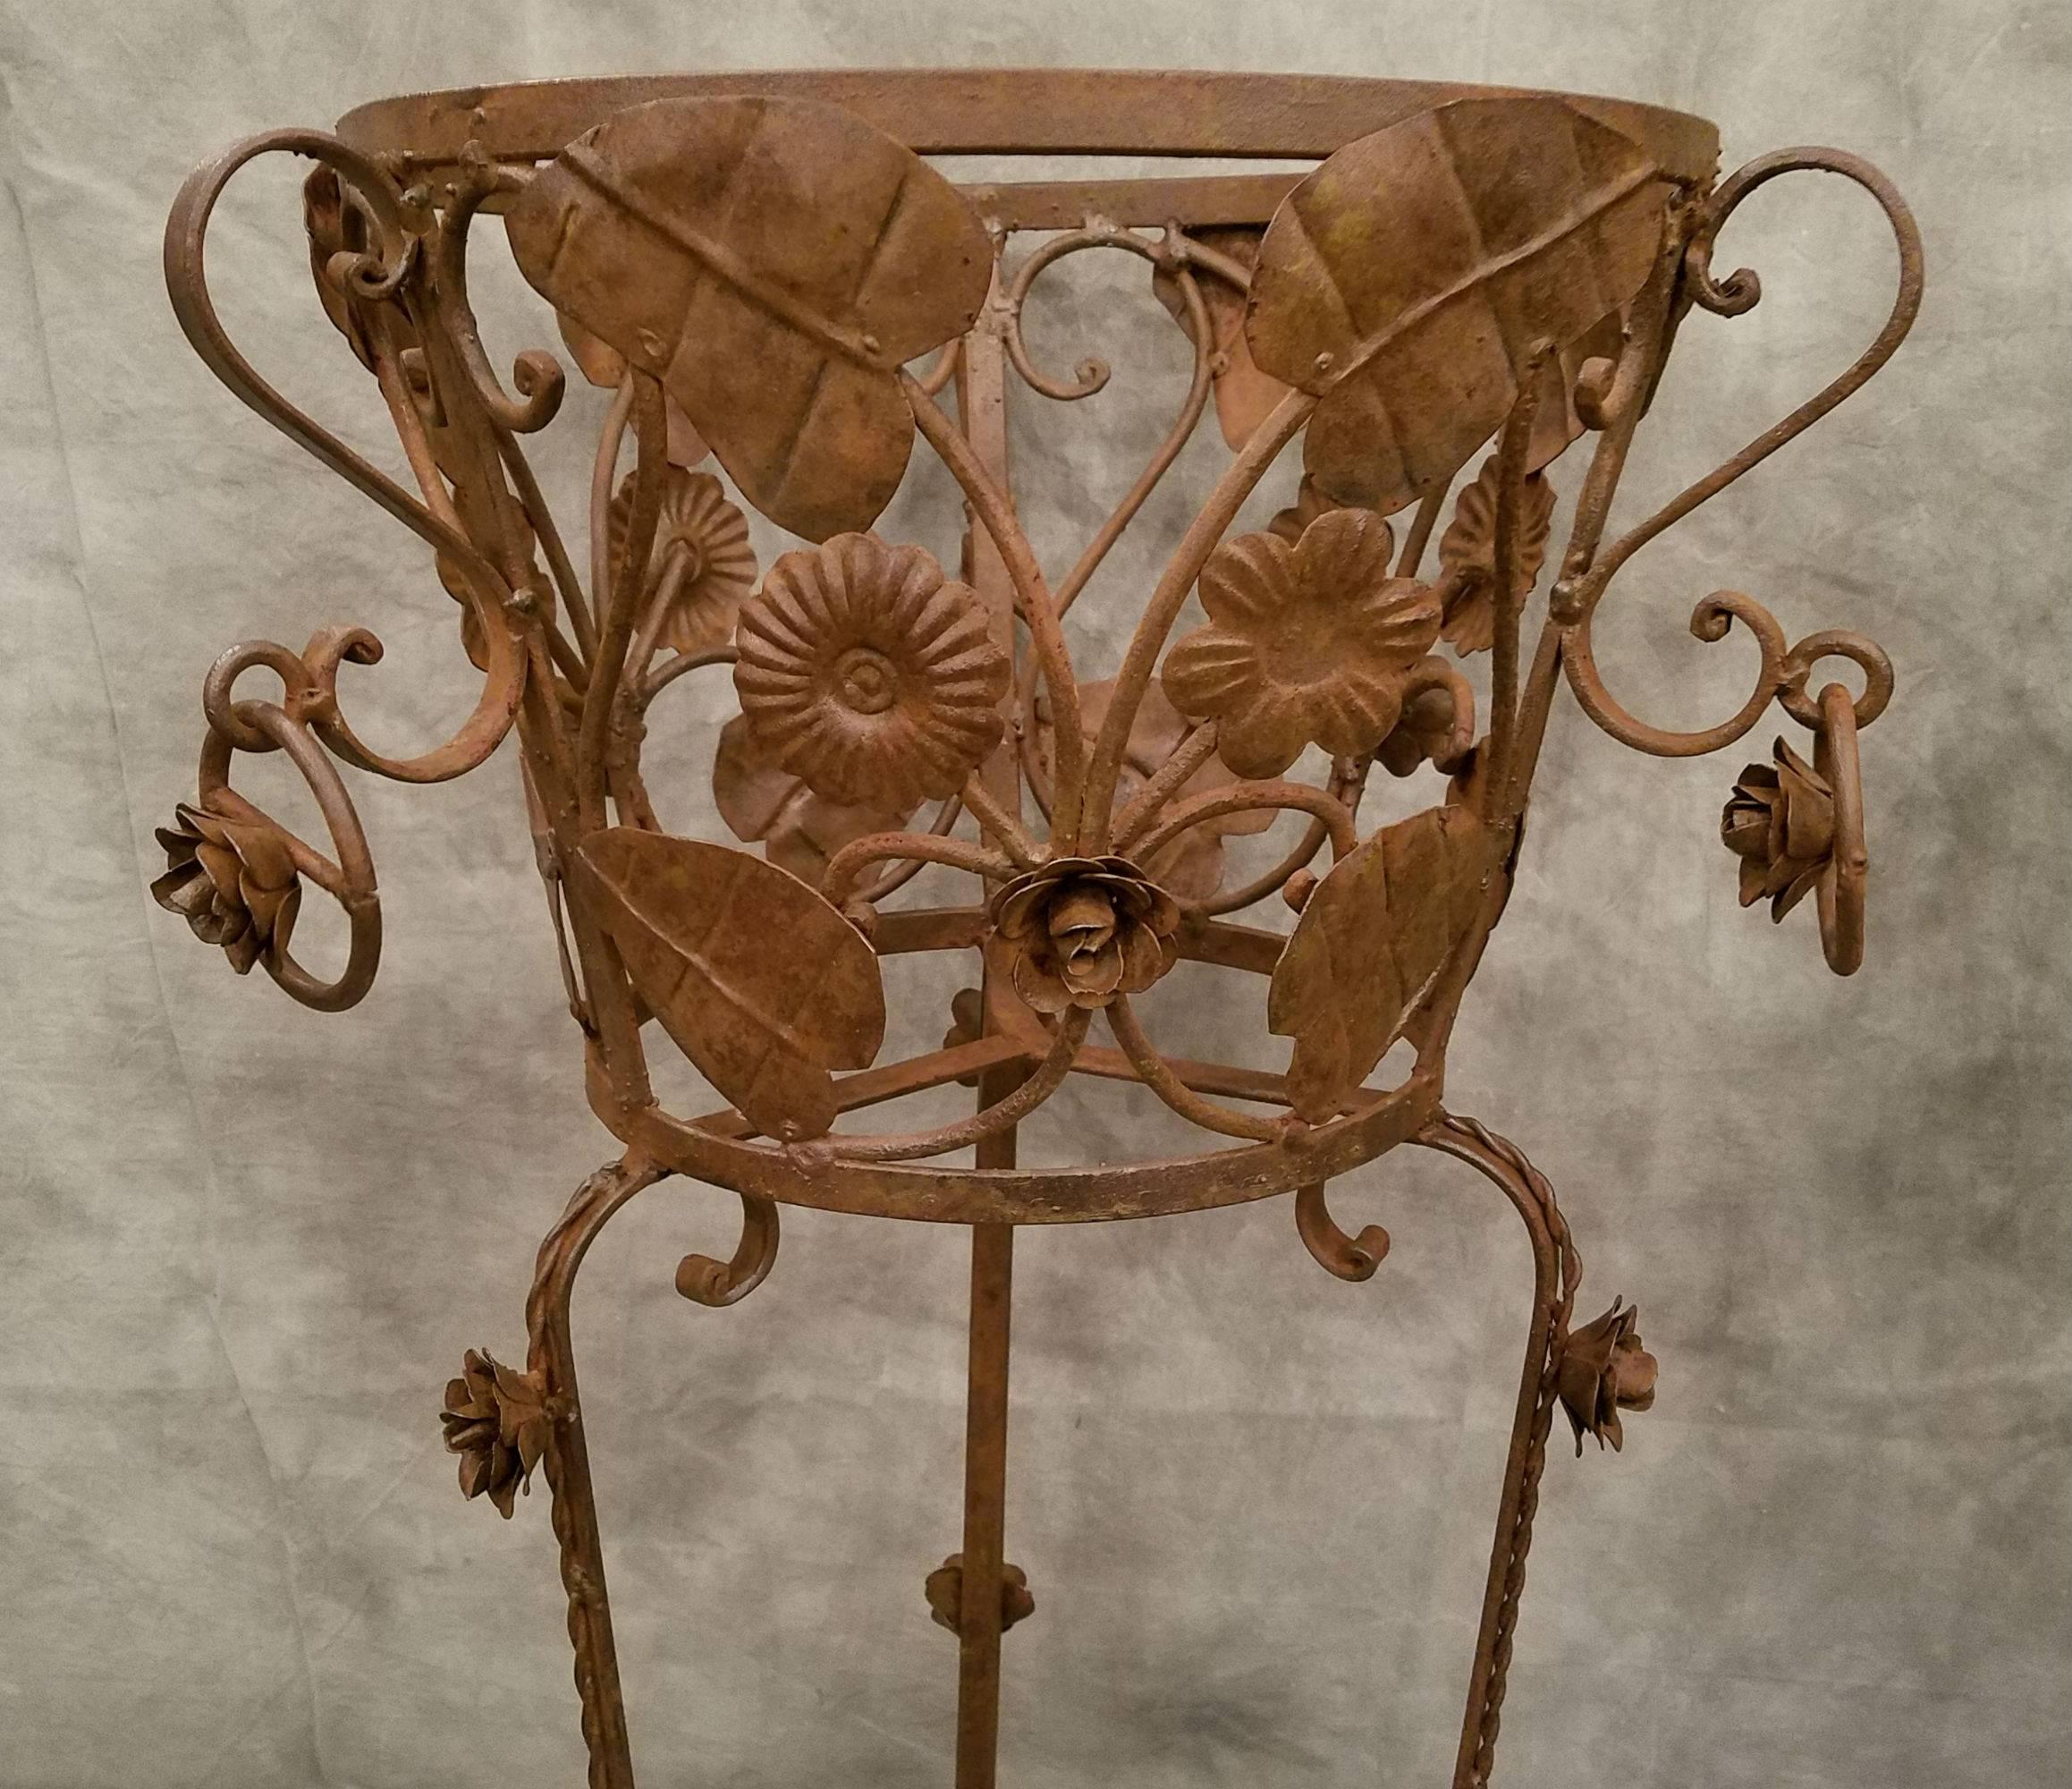 Pair of decorative leaf and flower iron plant stands.